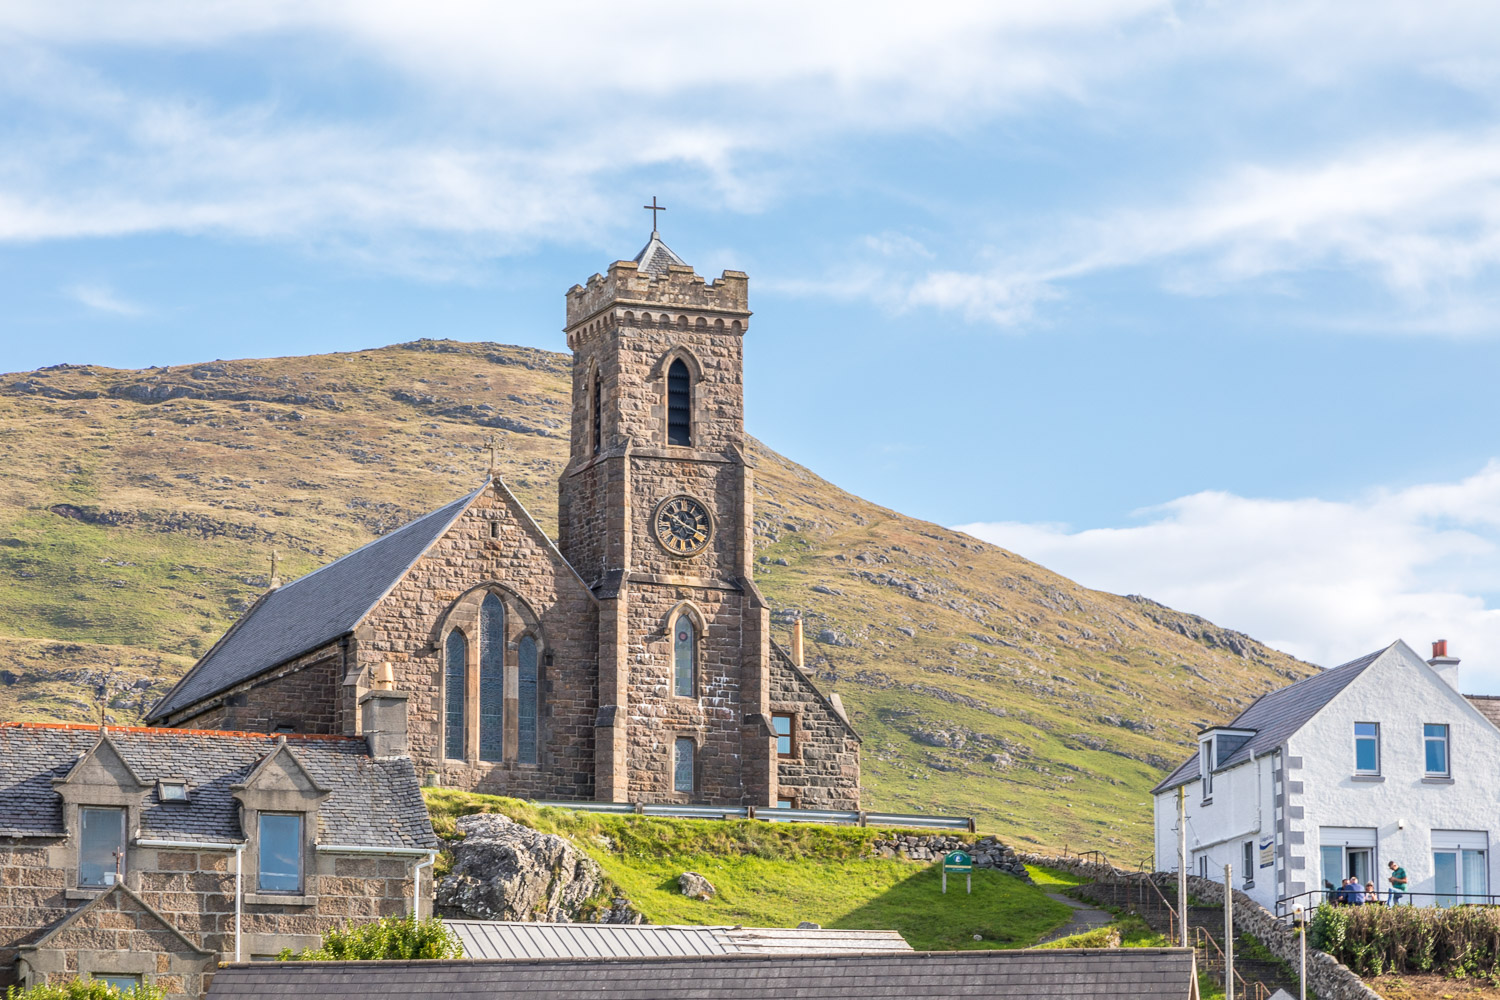 Castlebay church, The church of Our Lady, Star of the Sea